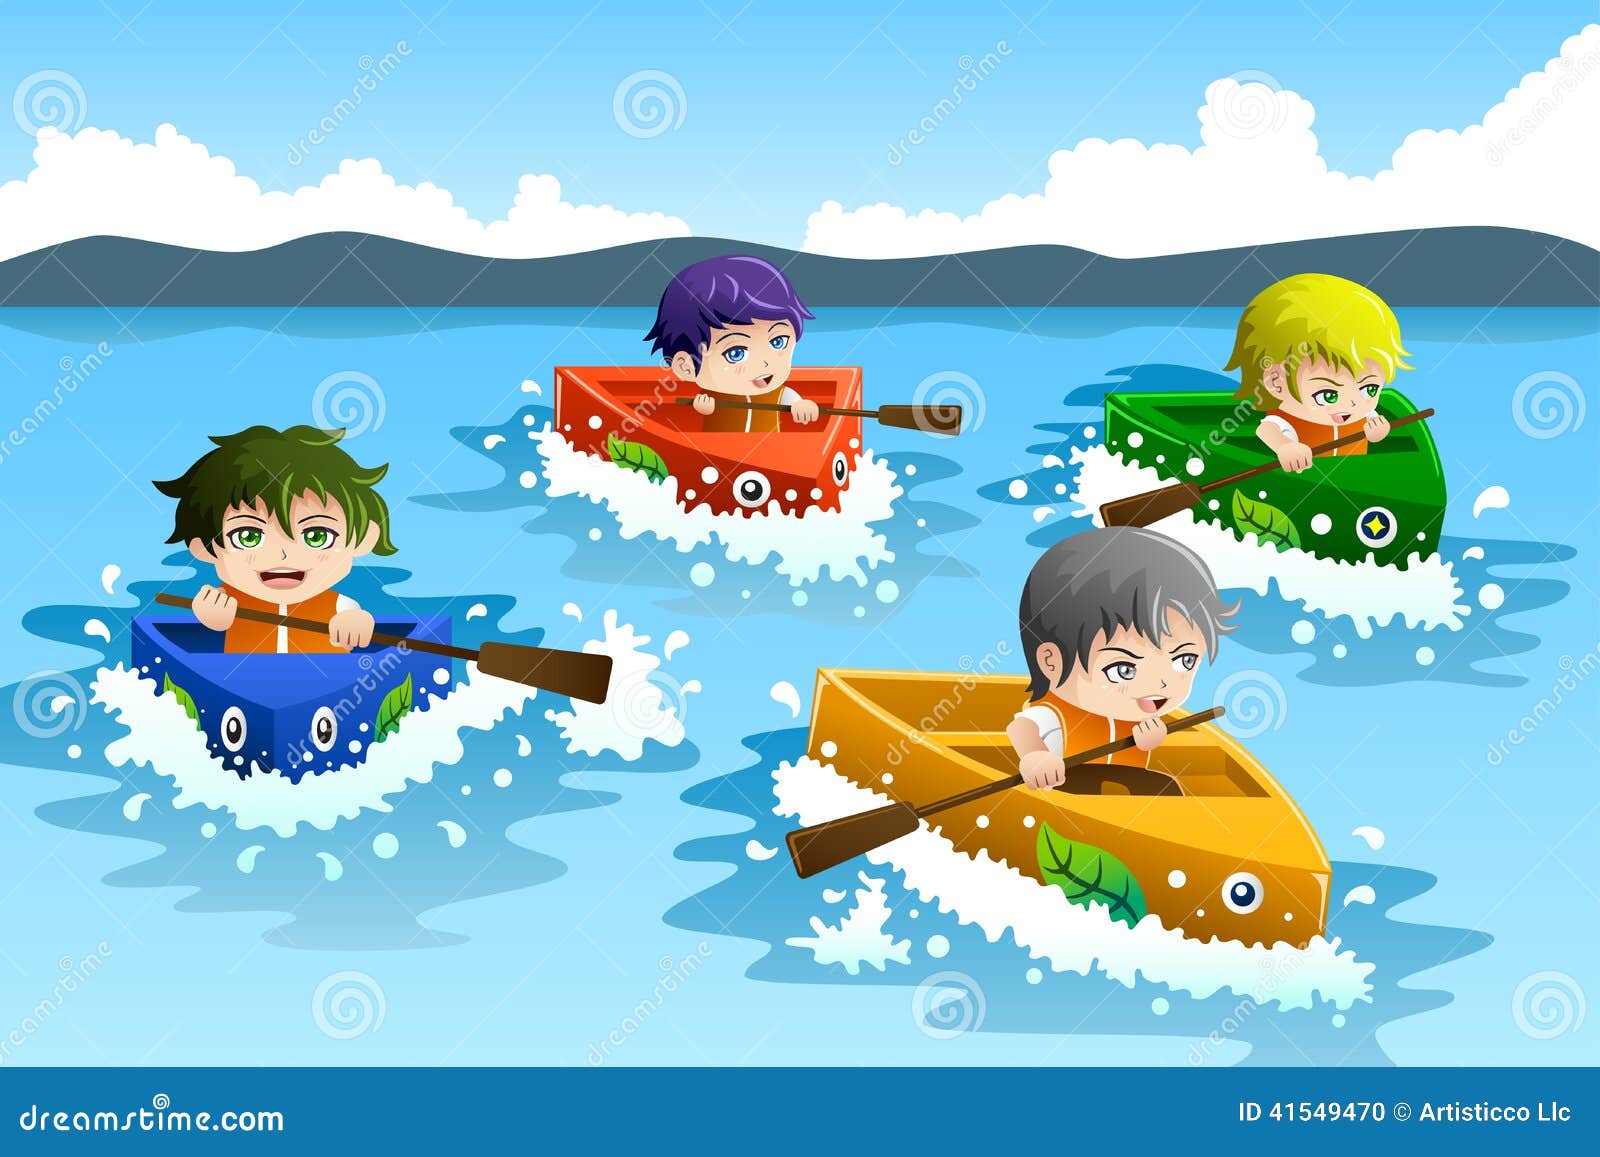 Kids In A Boat Race Stock Vector - Image: 41549470